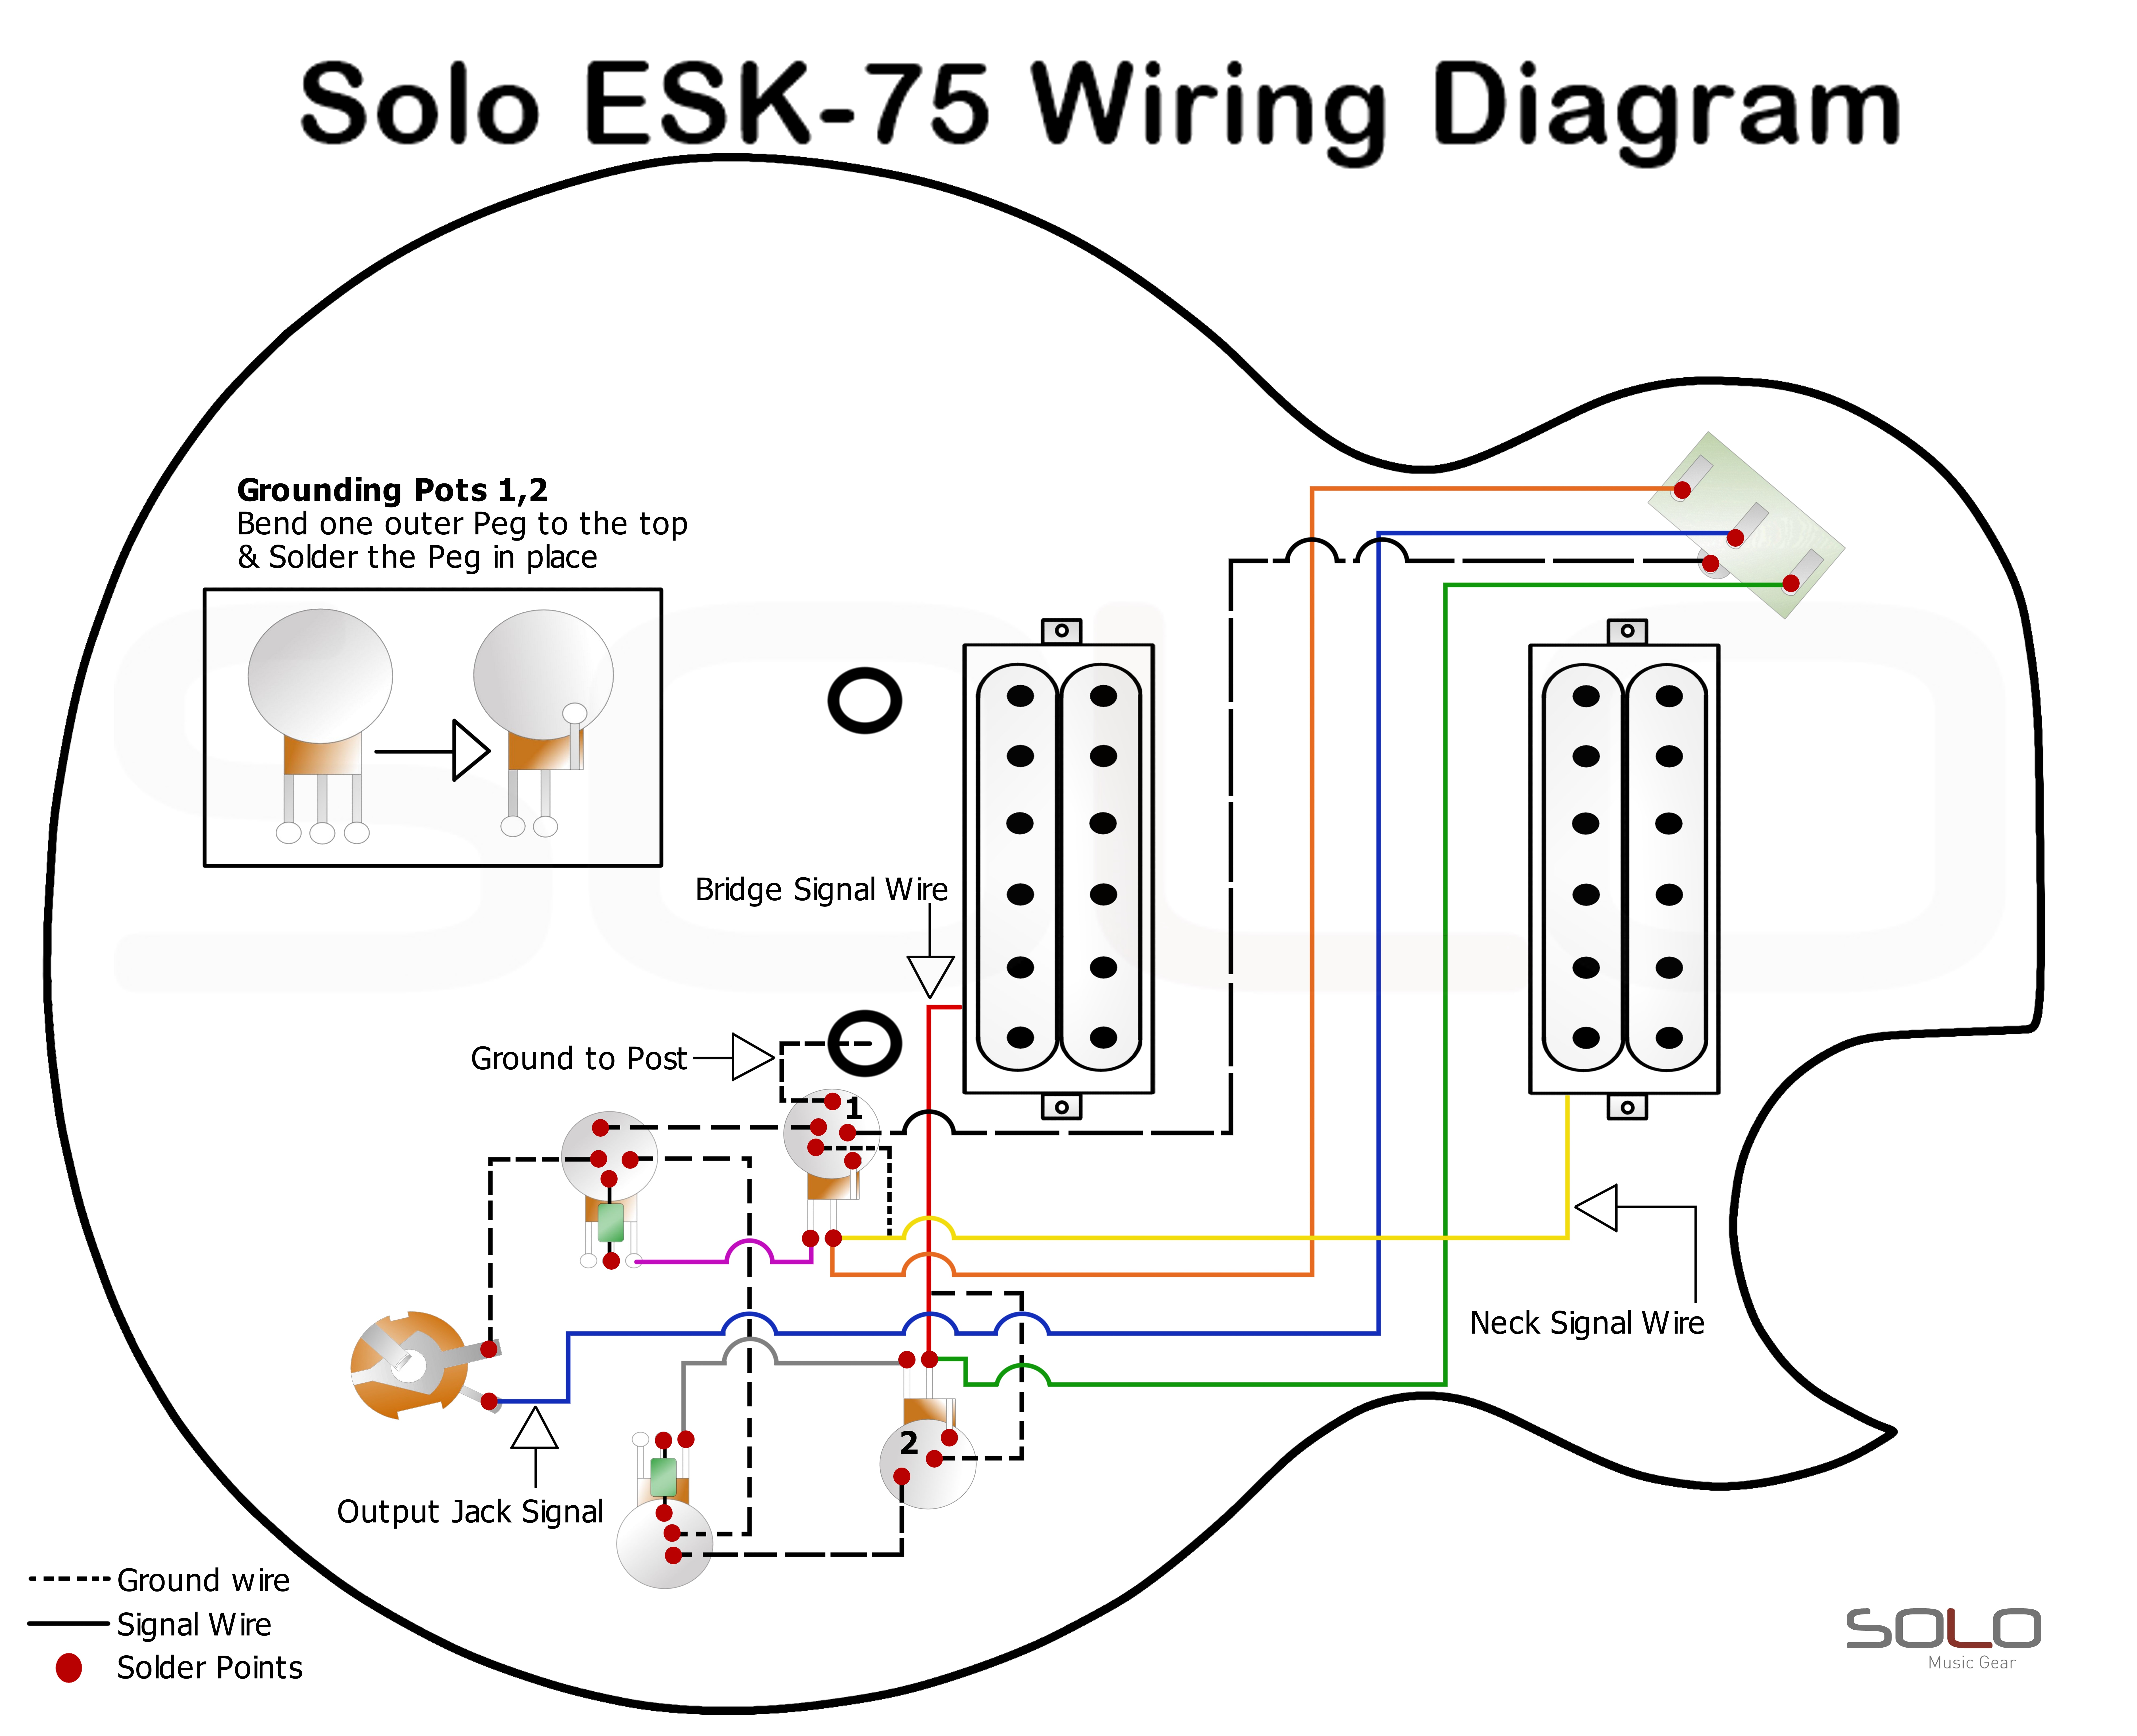 SOLO ES 75 Style Wiring Guide